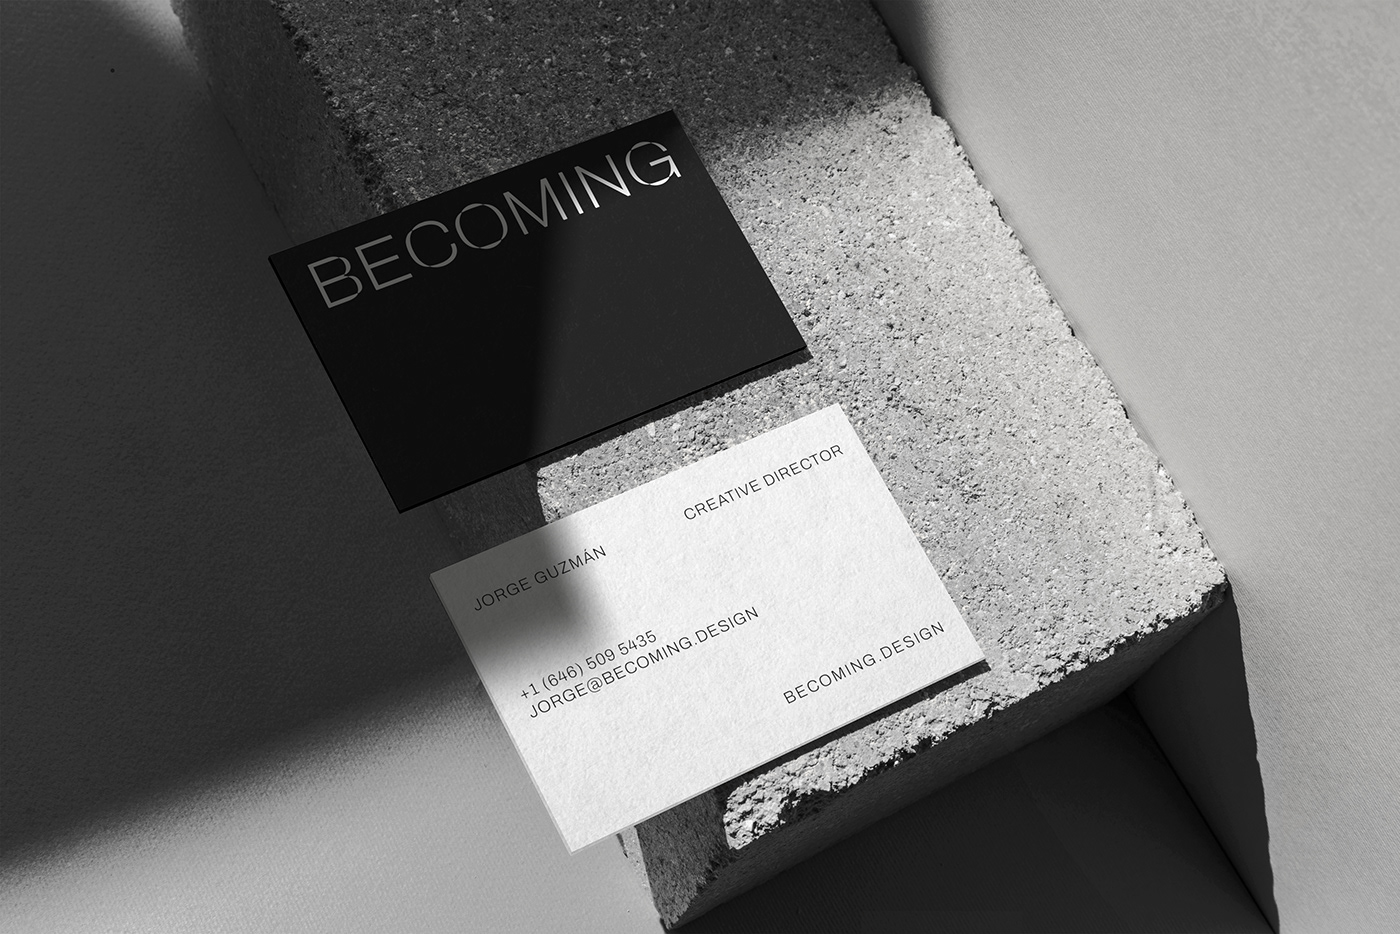 Business card for Becoming, an architecture studio in Dominican Republic